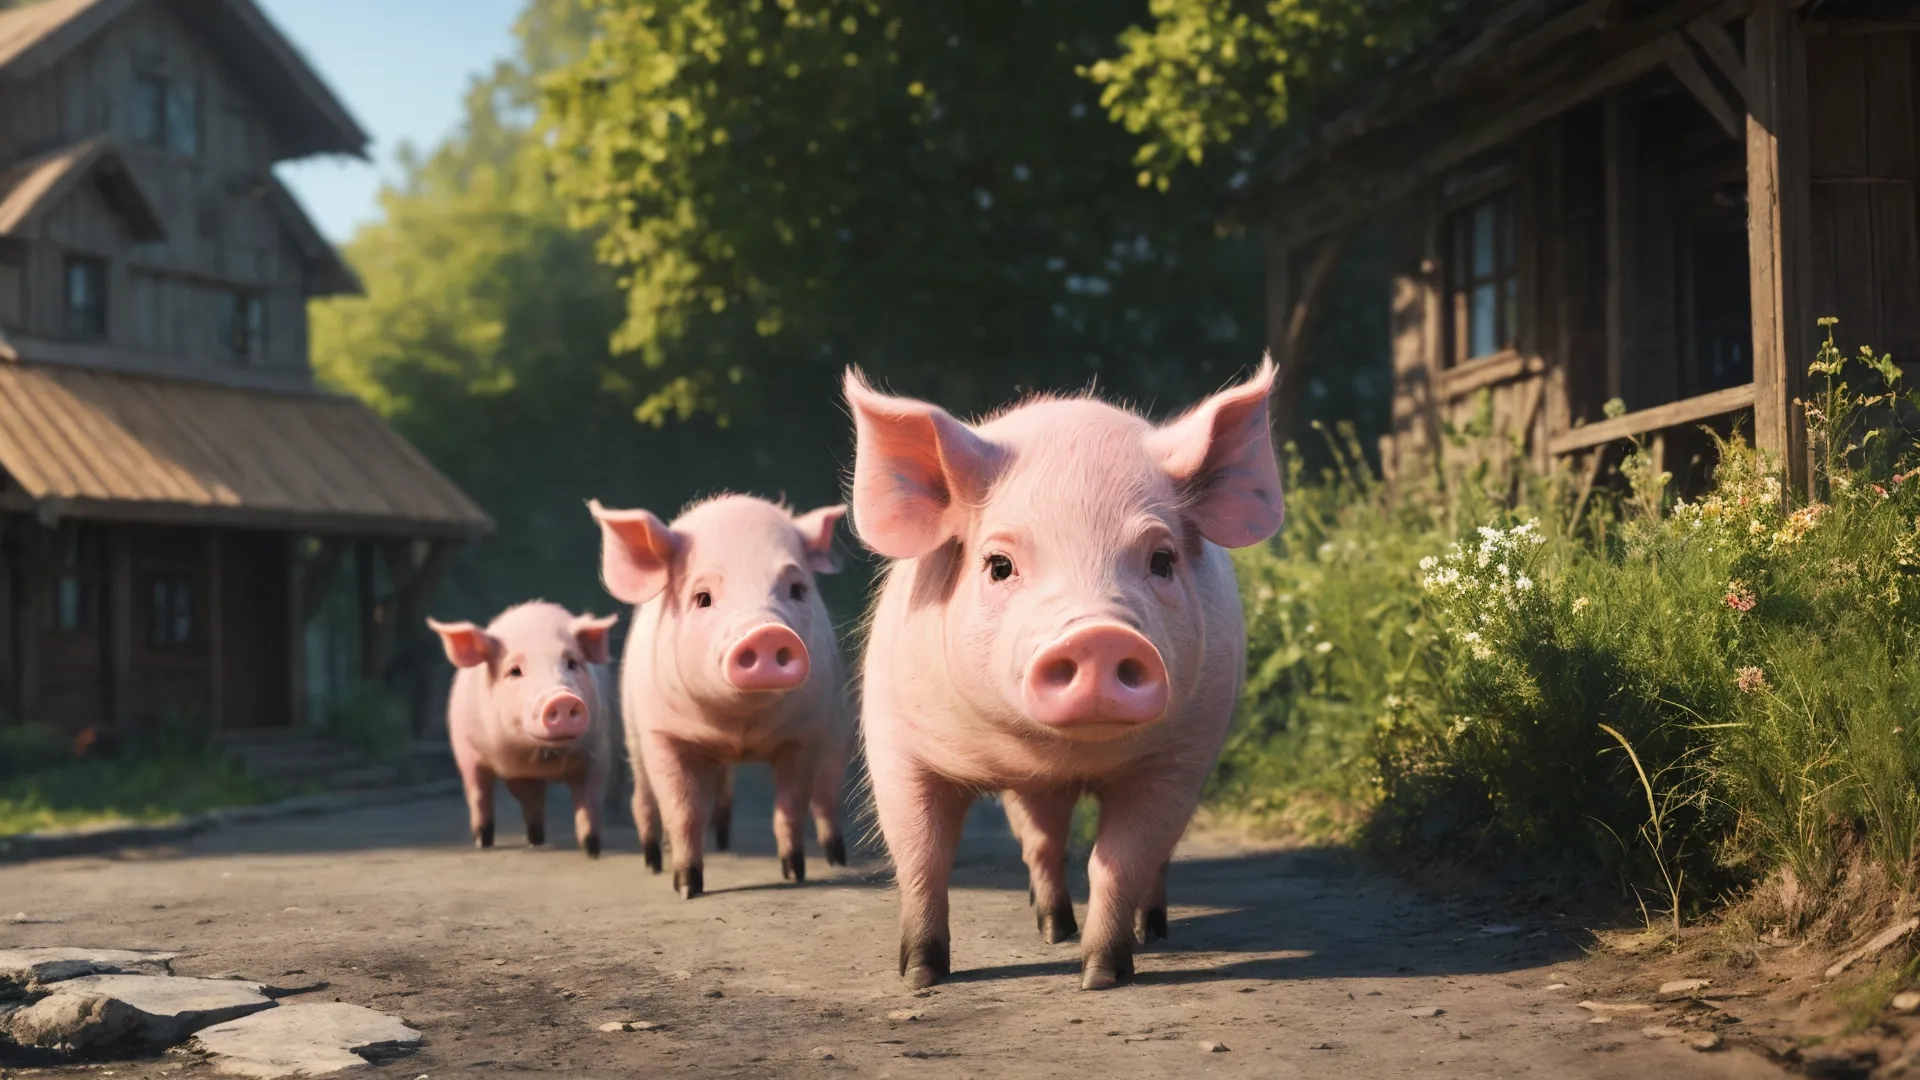 pink pigs are looking at the camera as they appear to be all walking in the middle of a dirt road near the barn building's driveway
